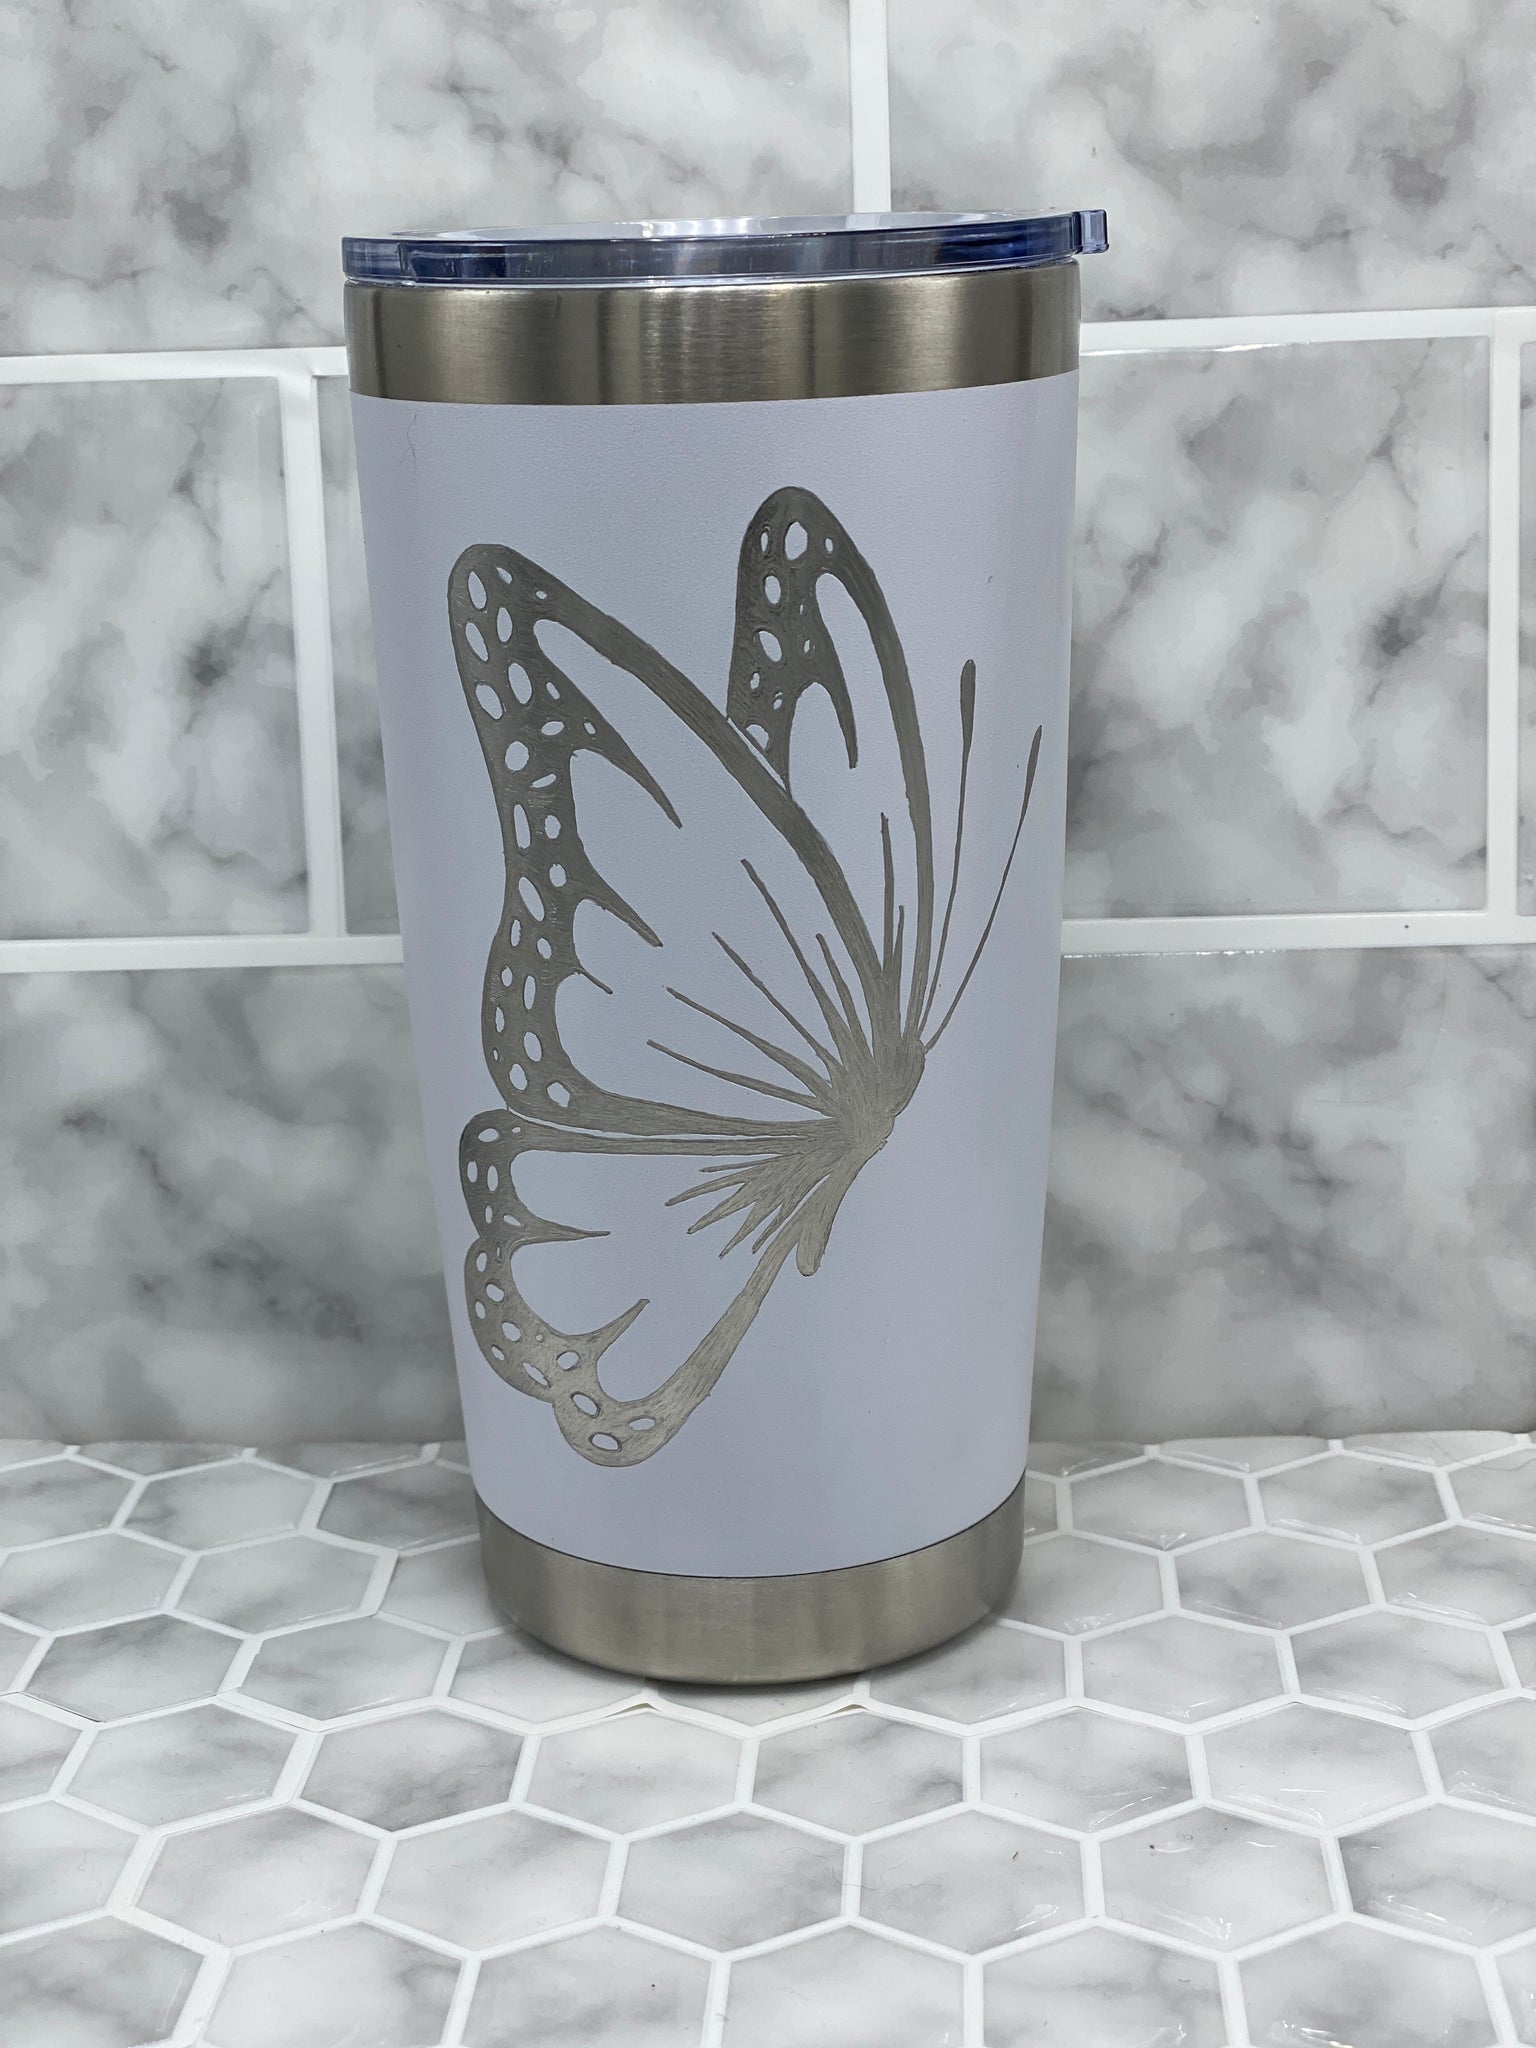 20 oz Pink Butterfly Glass Cup